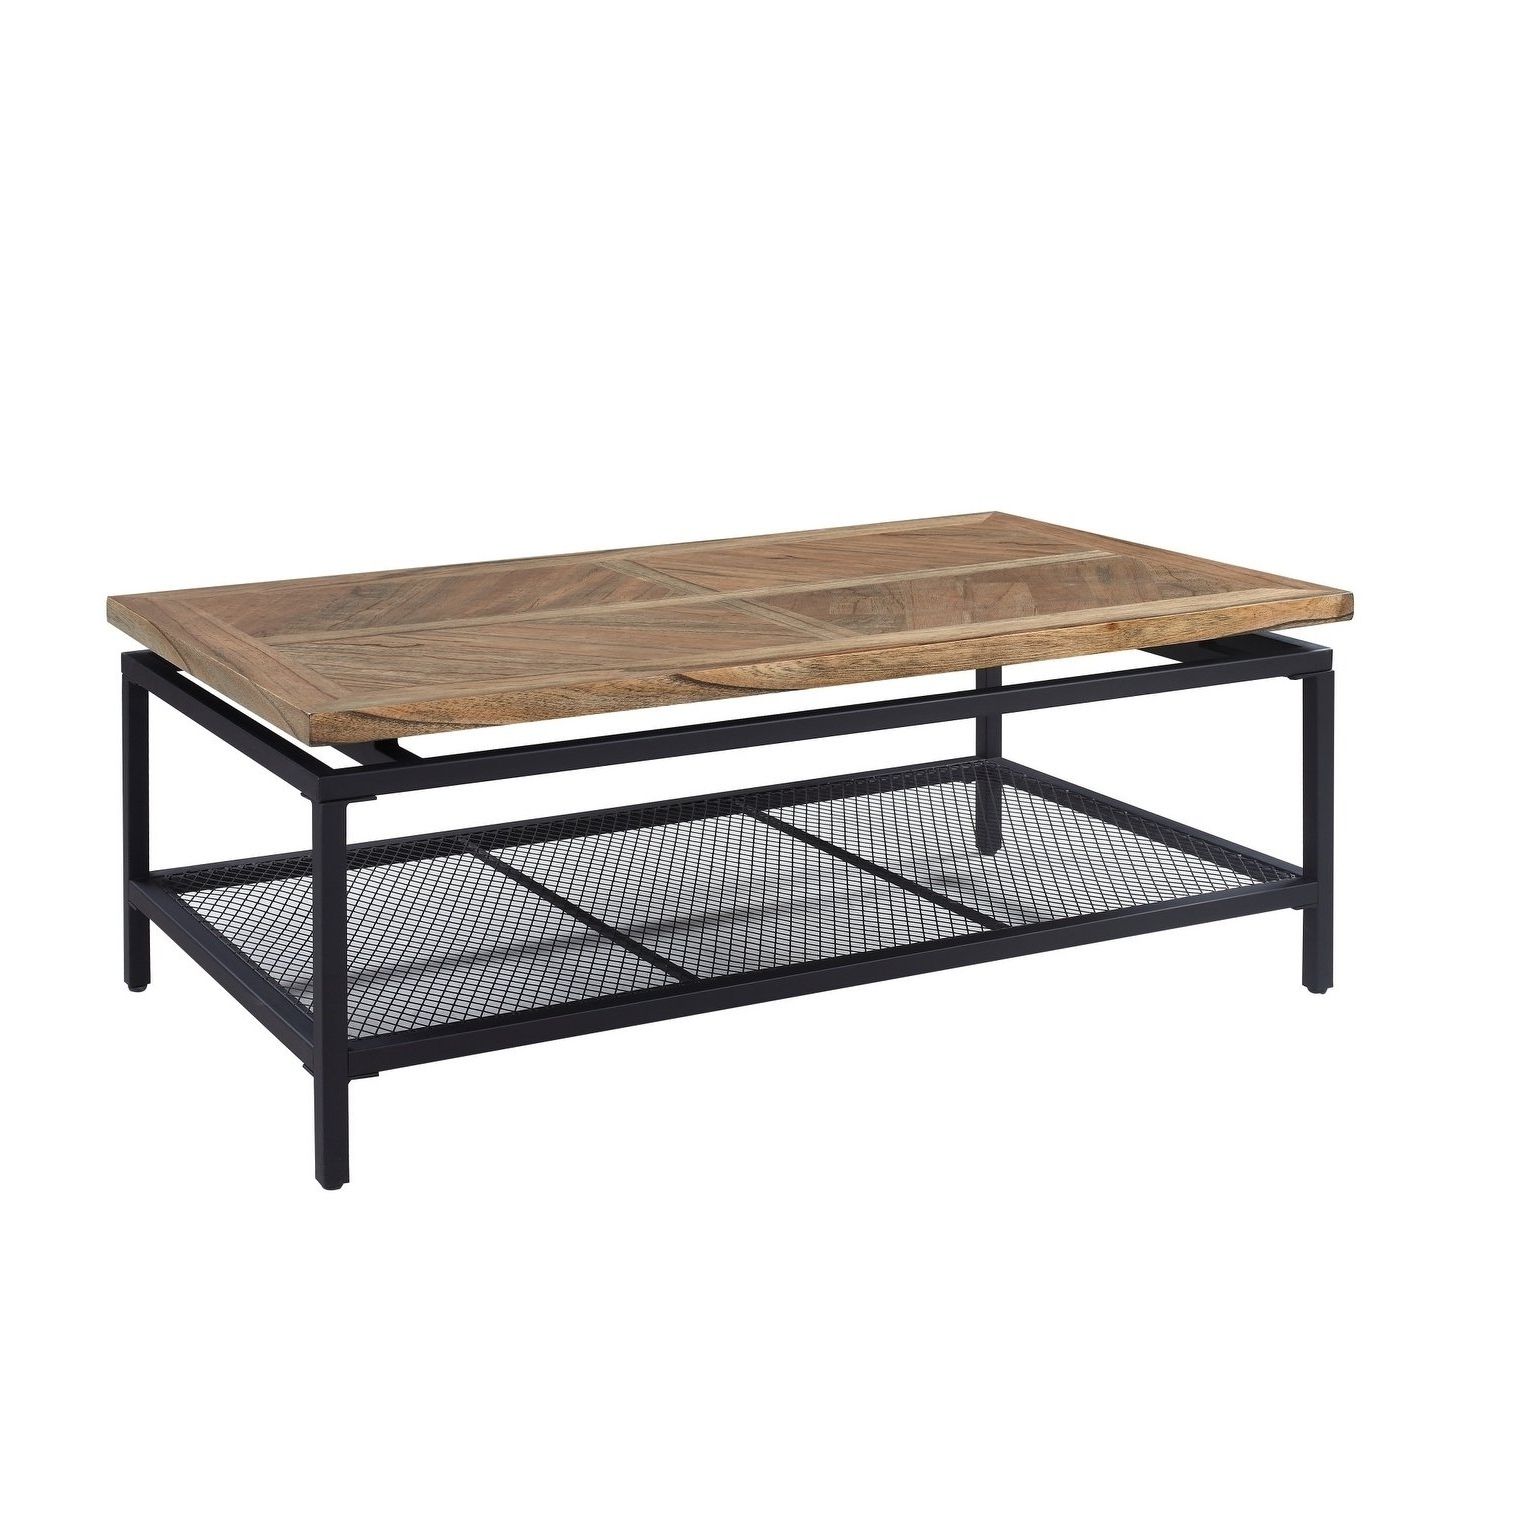 Shop Emerald Home Magnolia Black Metal Legs And Mesh Shelf Cocktail Within 2018 Magnolia Home Louver Cocktail Tables (View 11 of 20)